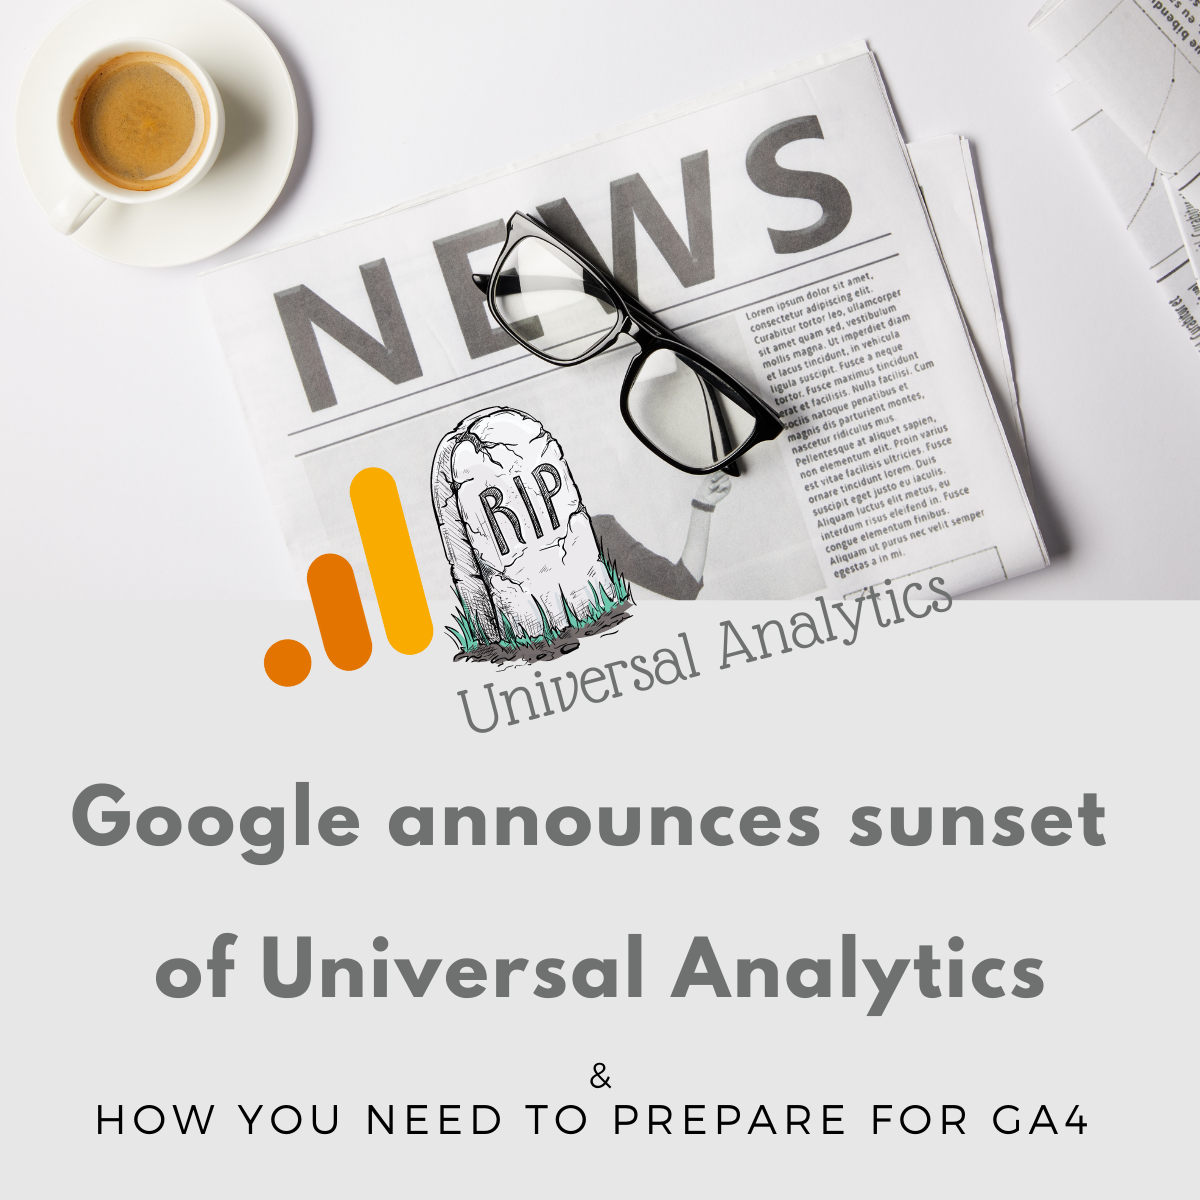 Universal Analytics to be replaced by GA4